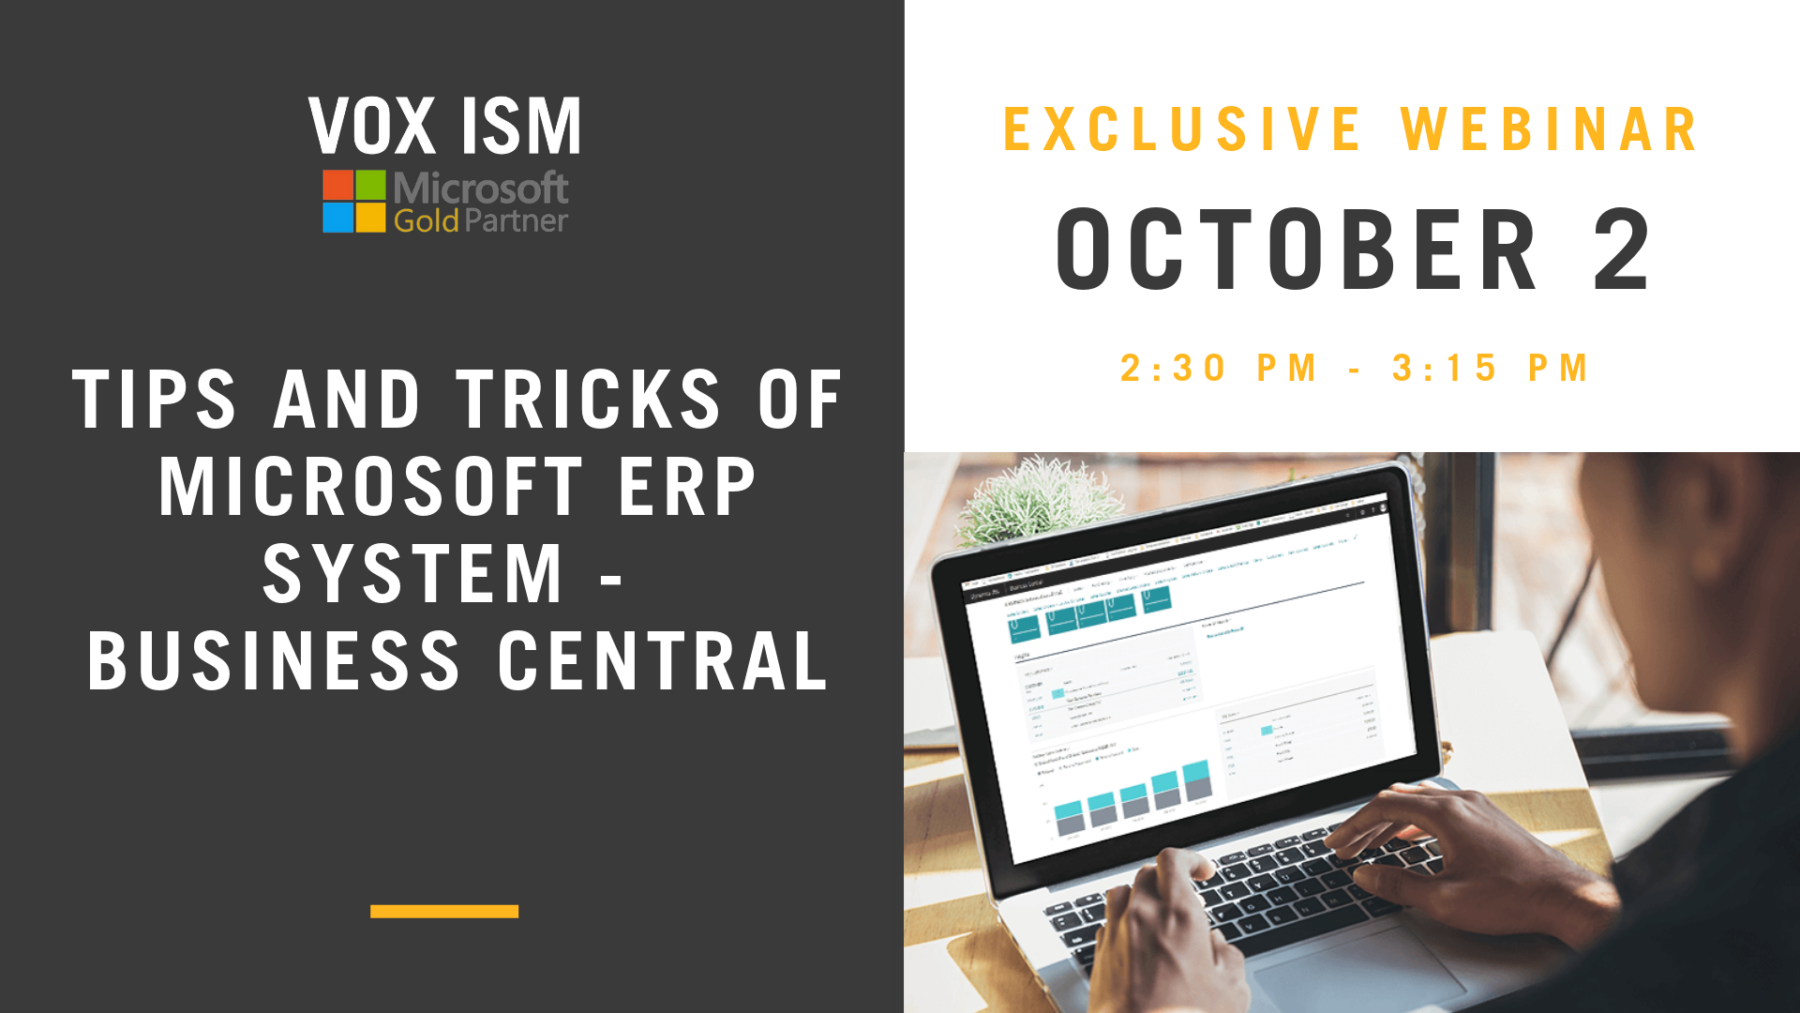 Tips and tricks of Microsoft ERP System - Business Central - VOX ISM